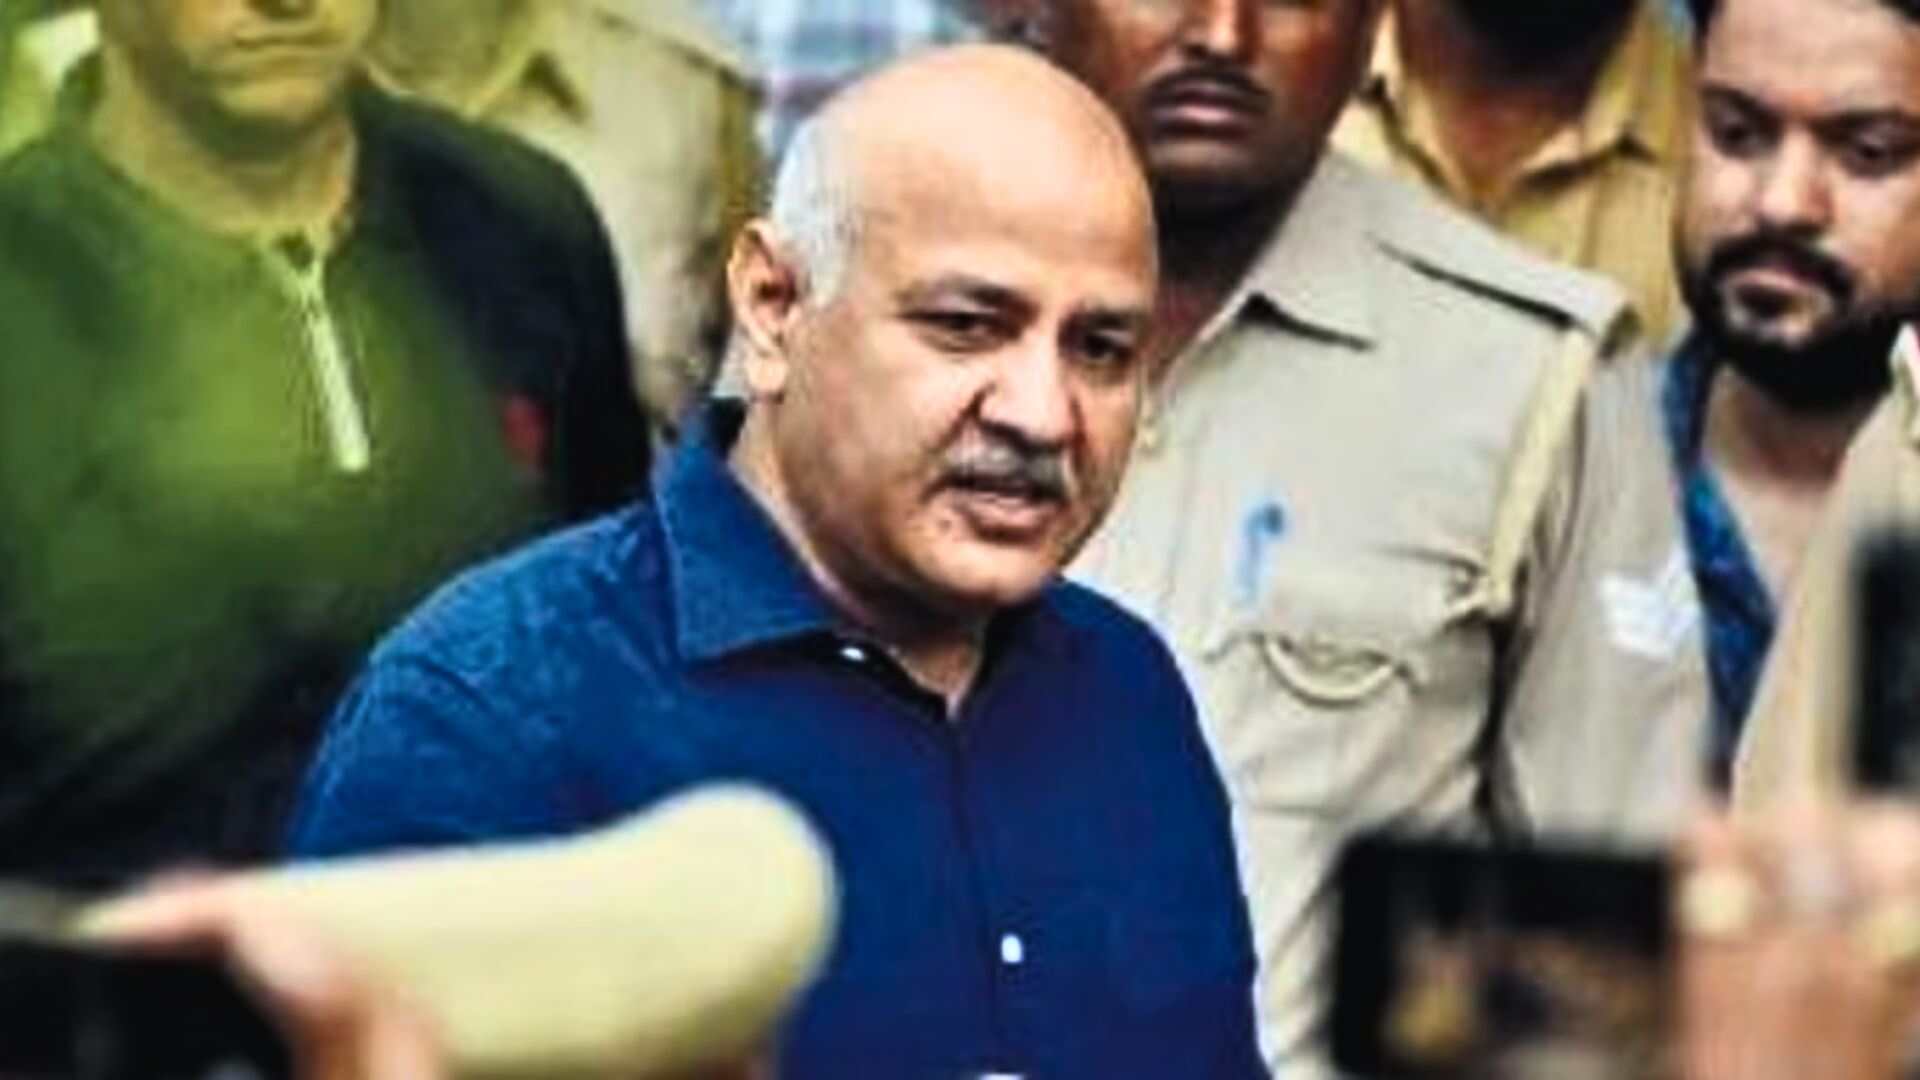 Delhi HC Allows Manish Sisodia To Meet Ailing Wife Once A Week